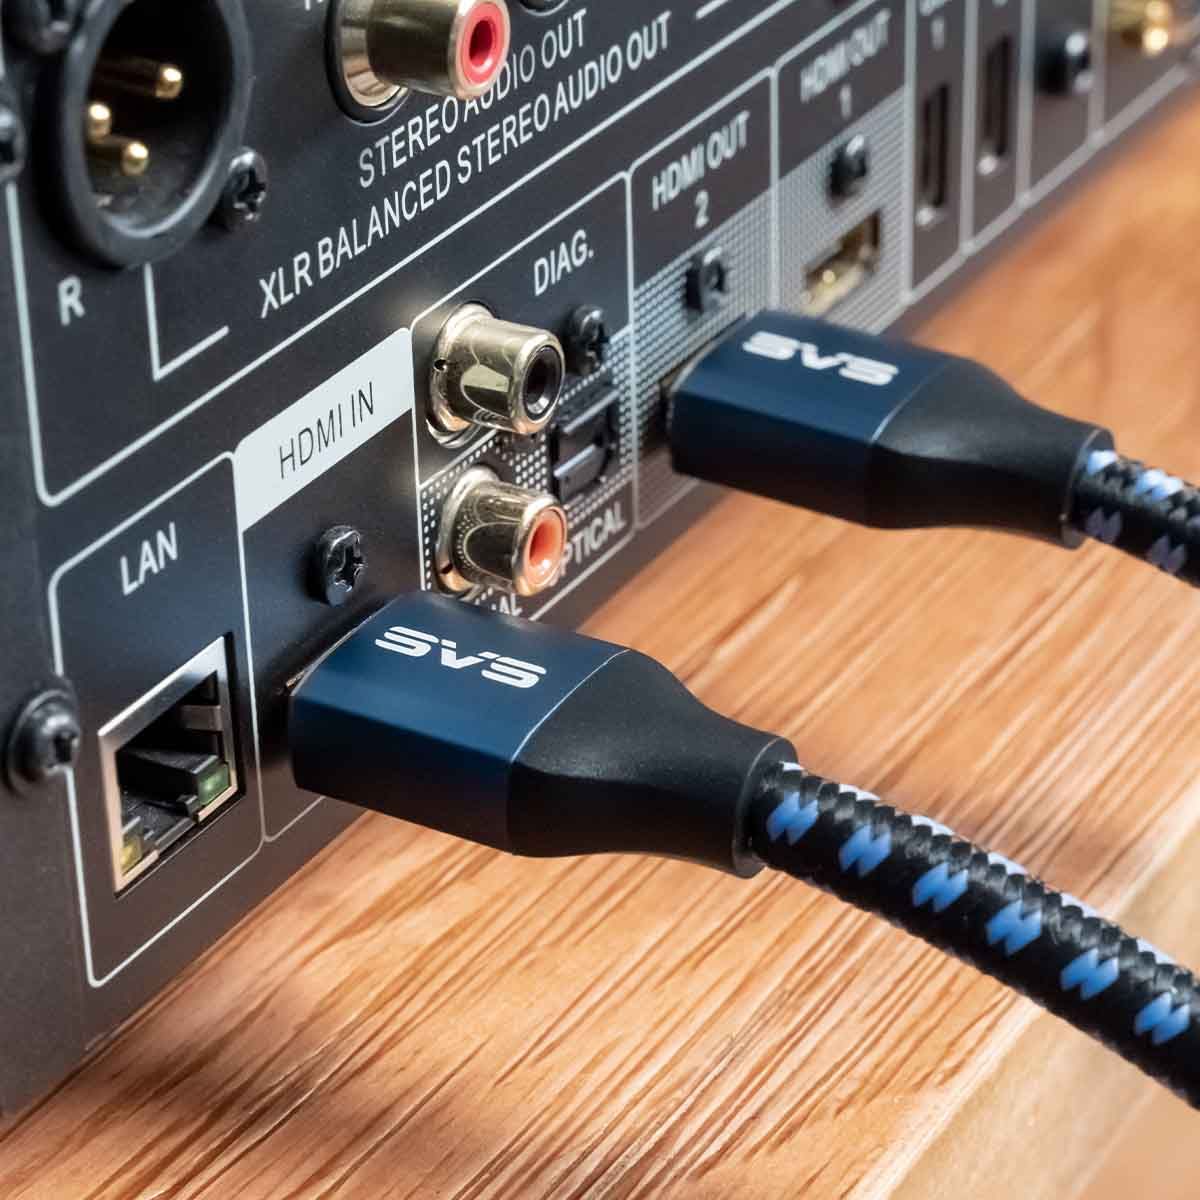 SVS SoundPath Ultra HDMI Cable - plugged into AVR